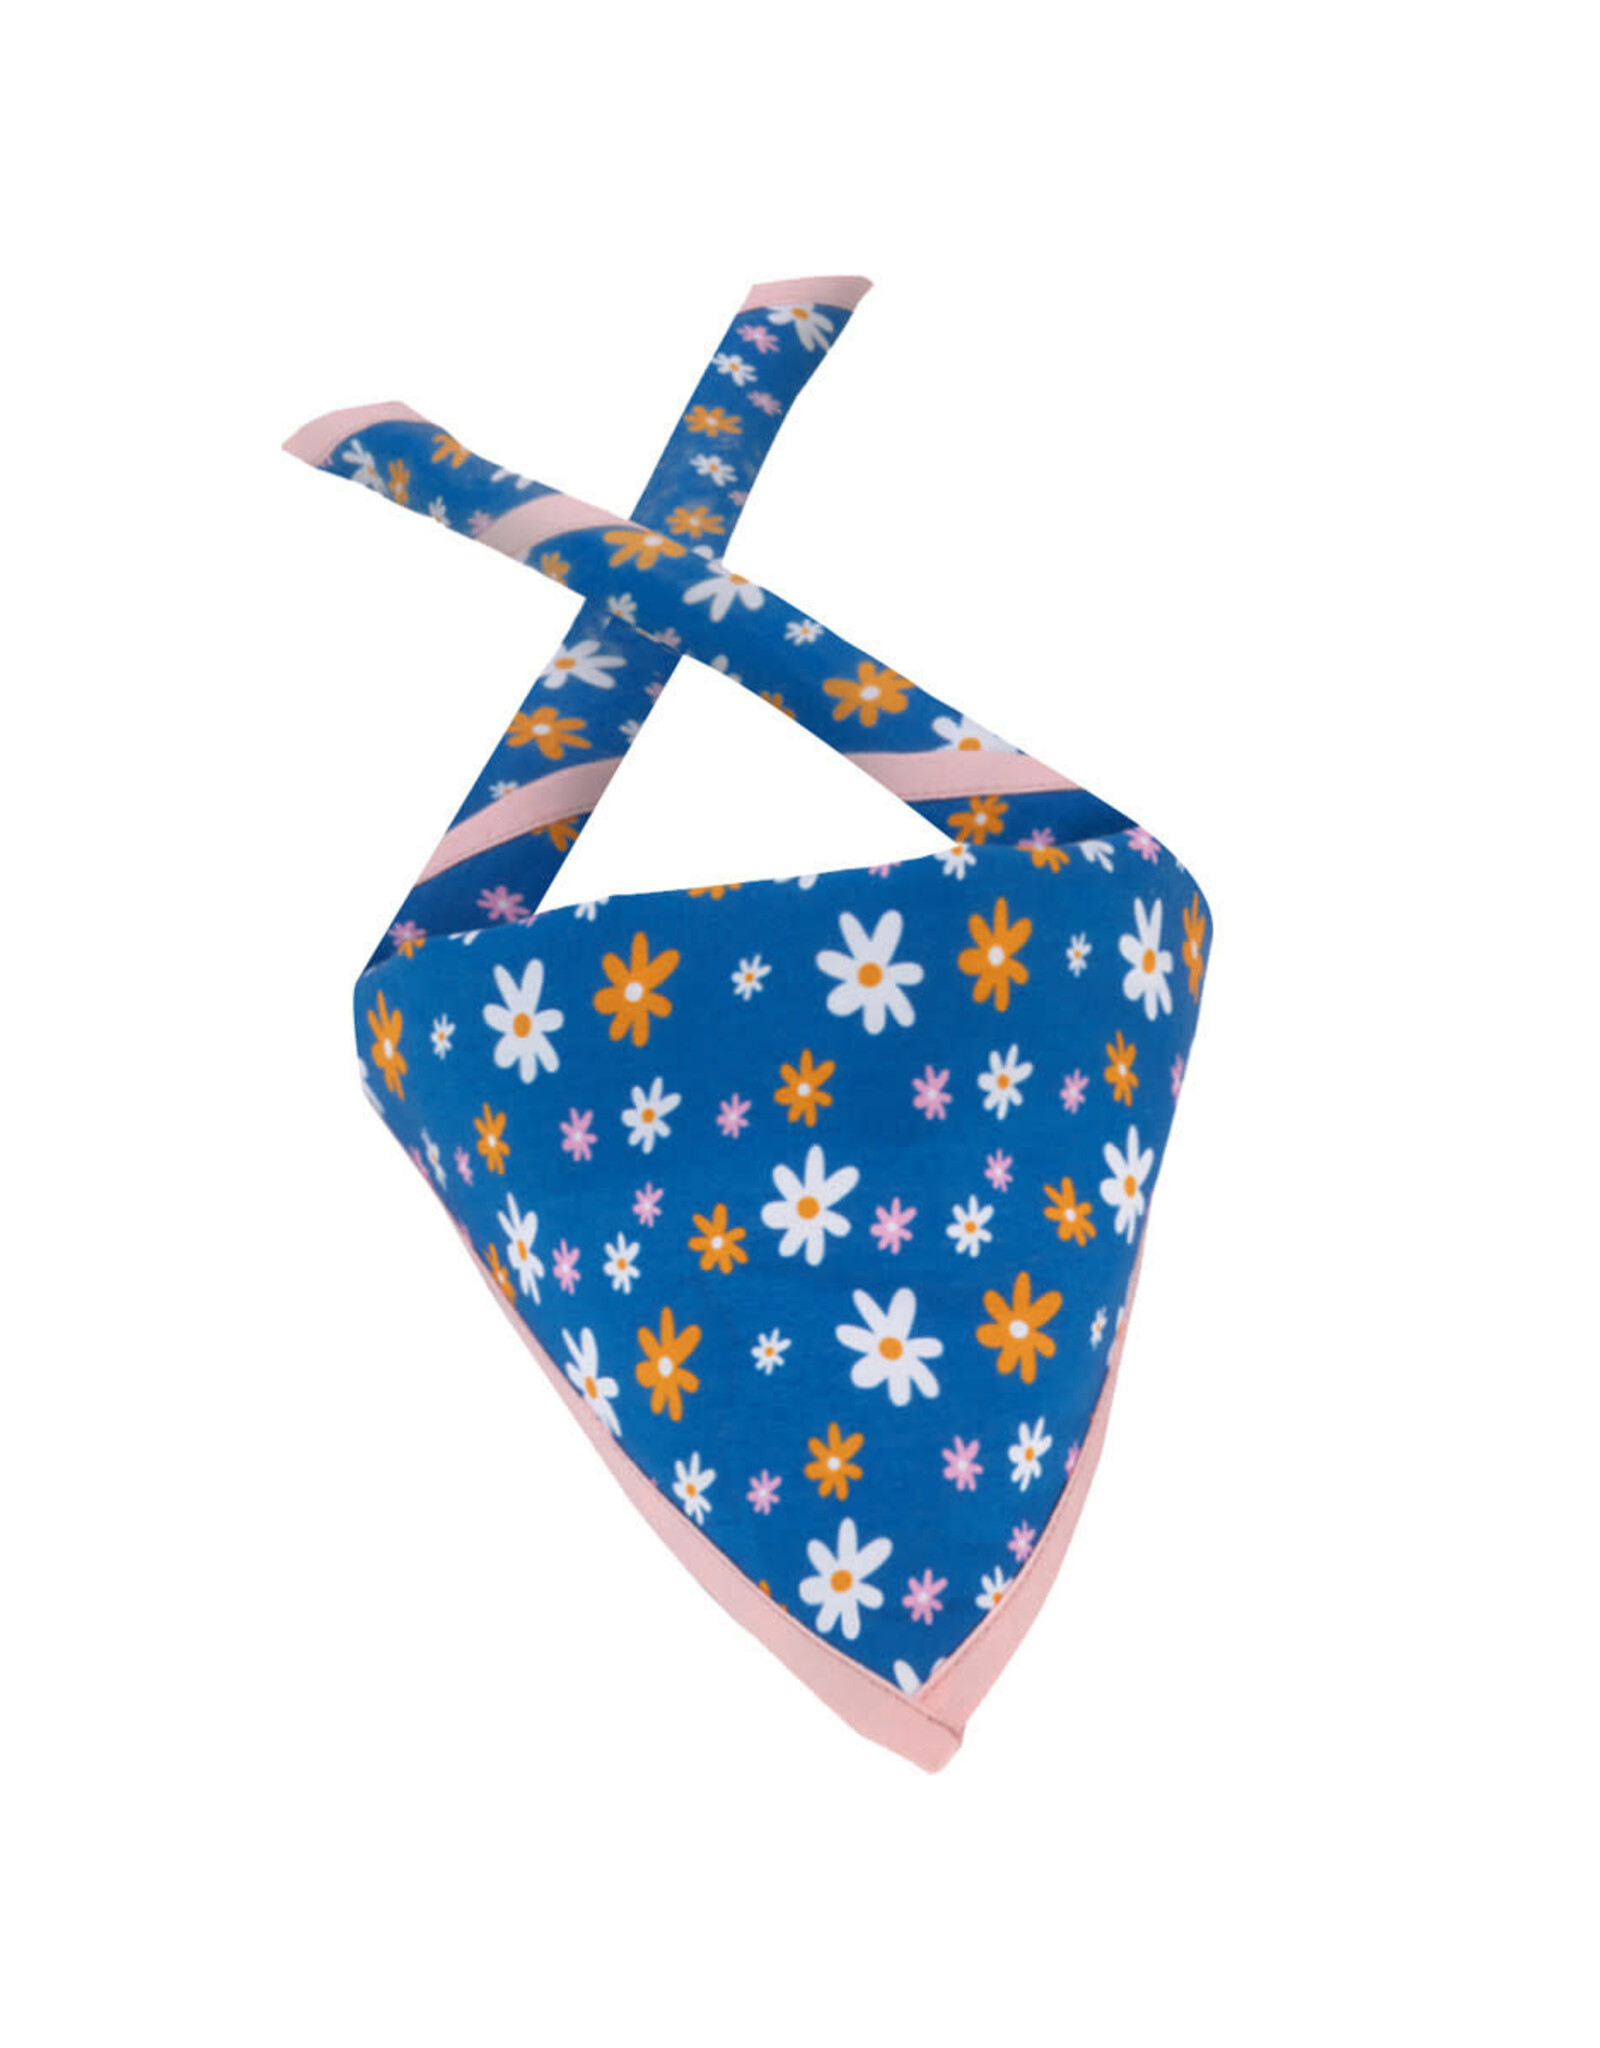 GIRL SCOUTS OF THE USA Official Daisy Scarf